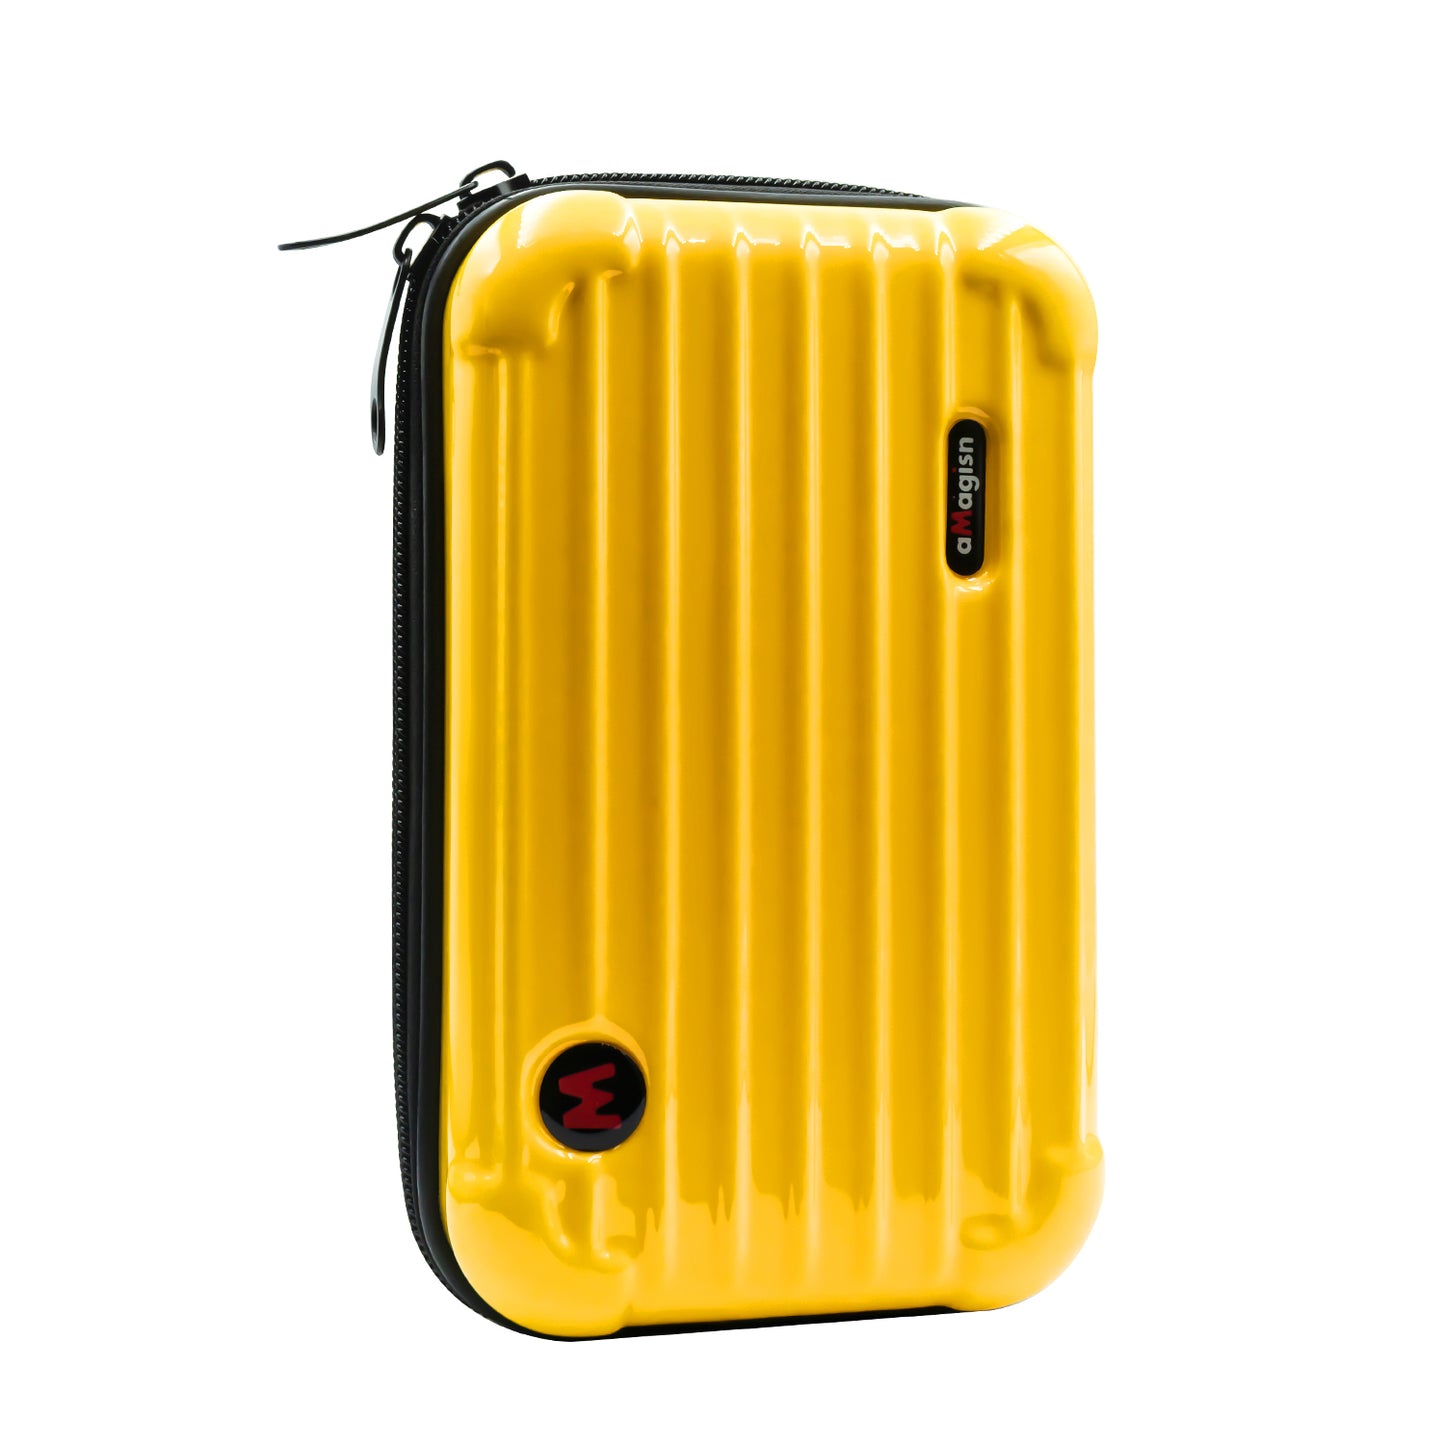 Carrying Case for Insta360 GO 3 Action Camera Accessories Portable Storage Bag